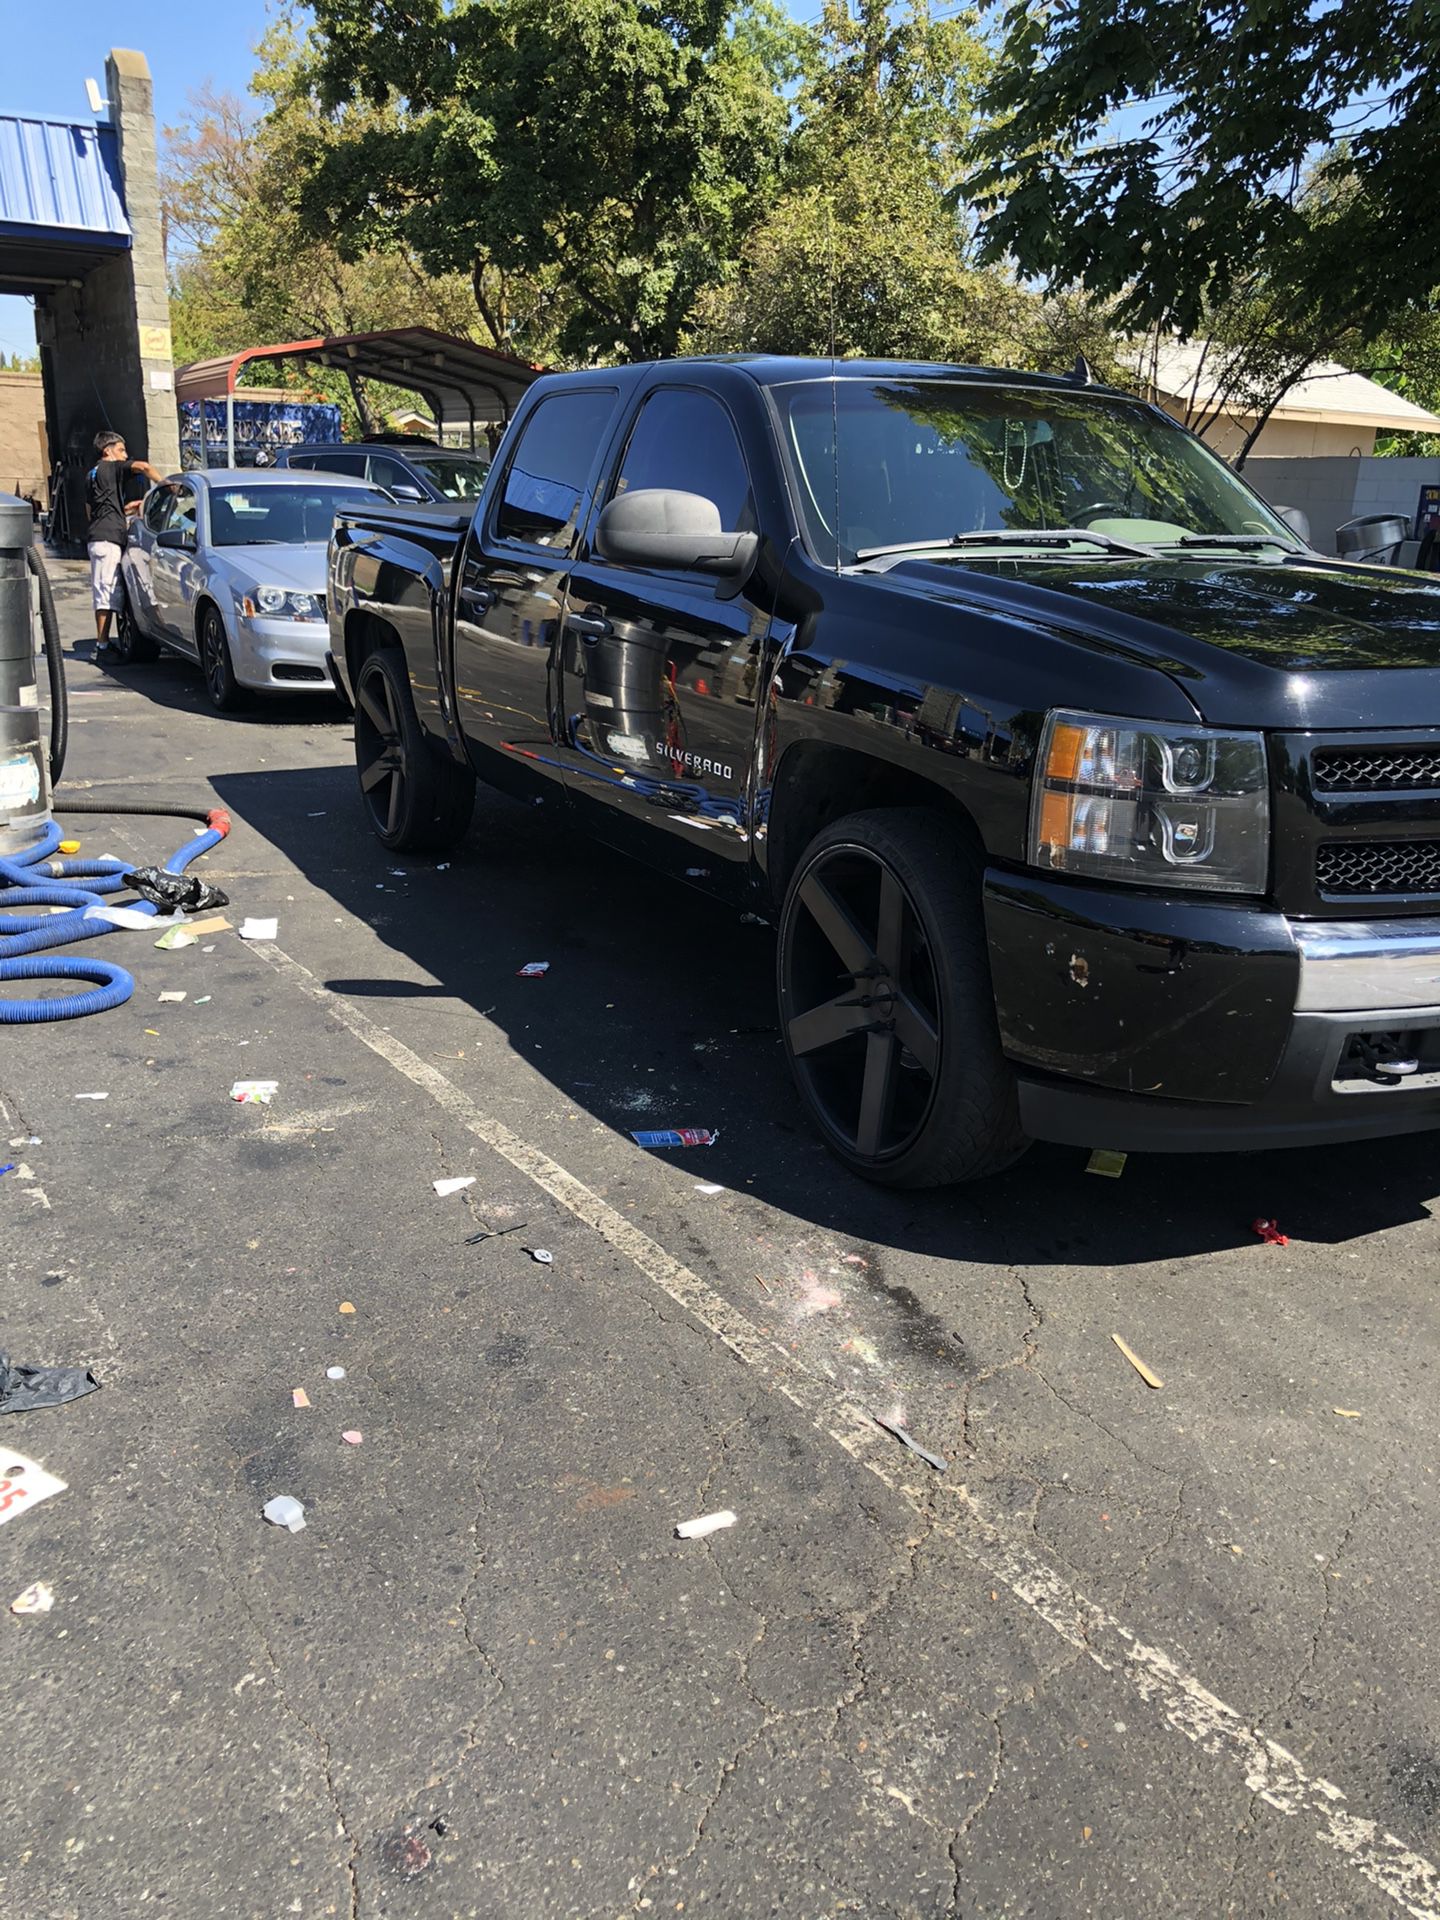 2011 Chevy Silverado LS 3.5 with 19100000 miles on it runs like a champ new rotors and drums breaks all the way around music 26” dubs balls clean pai